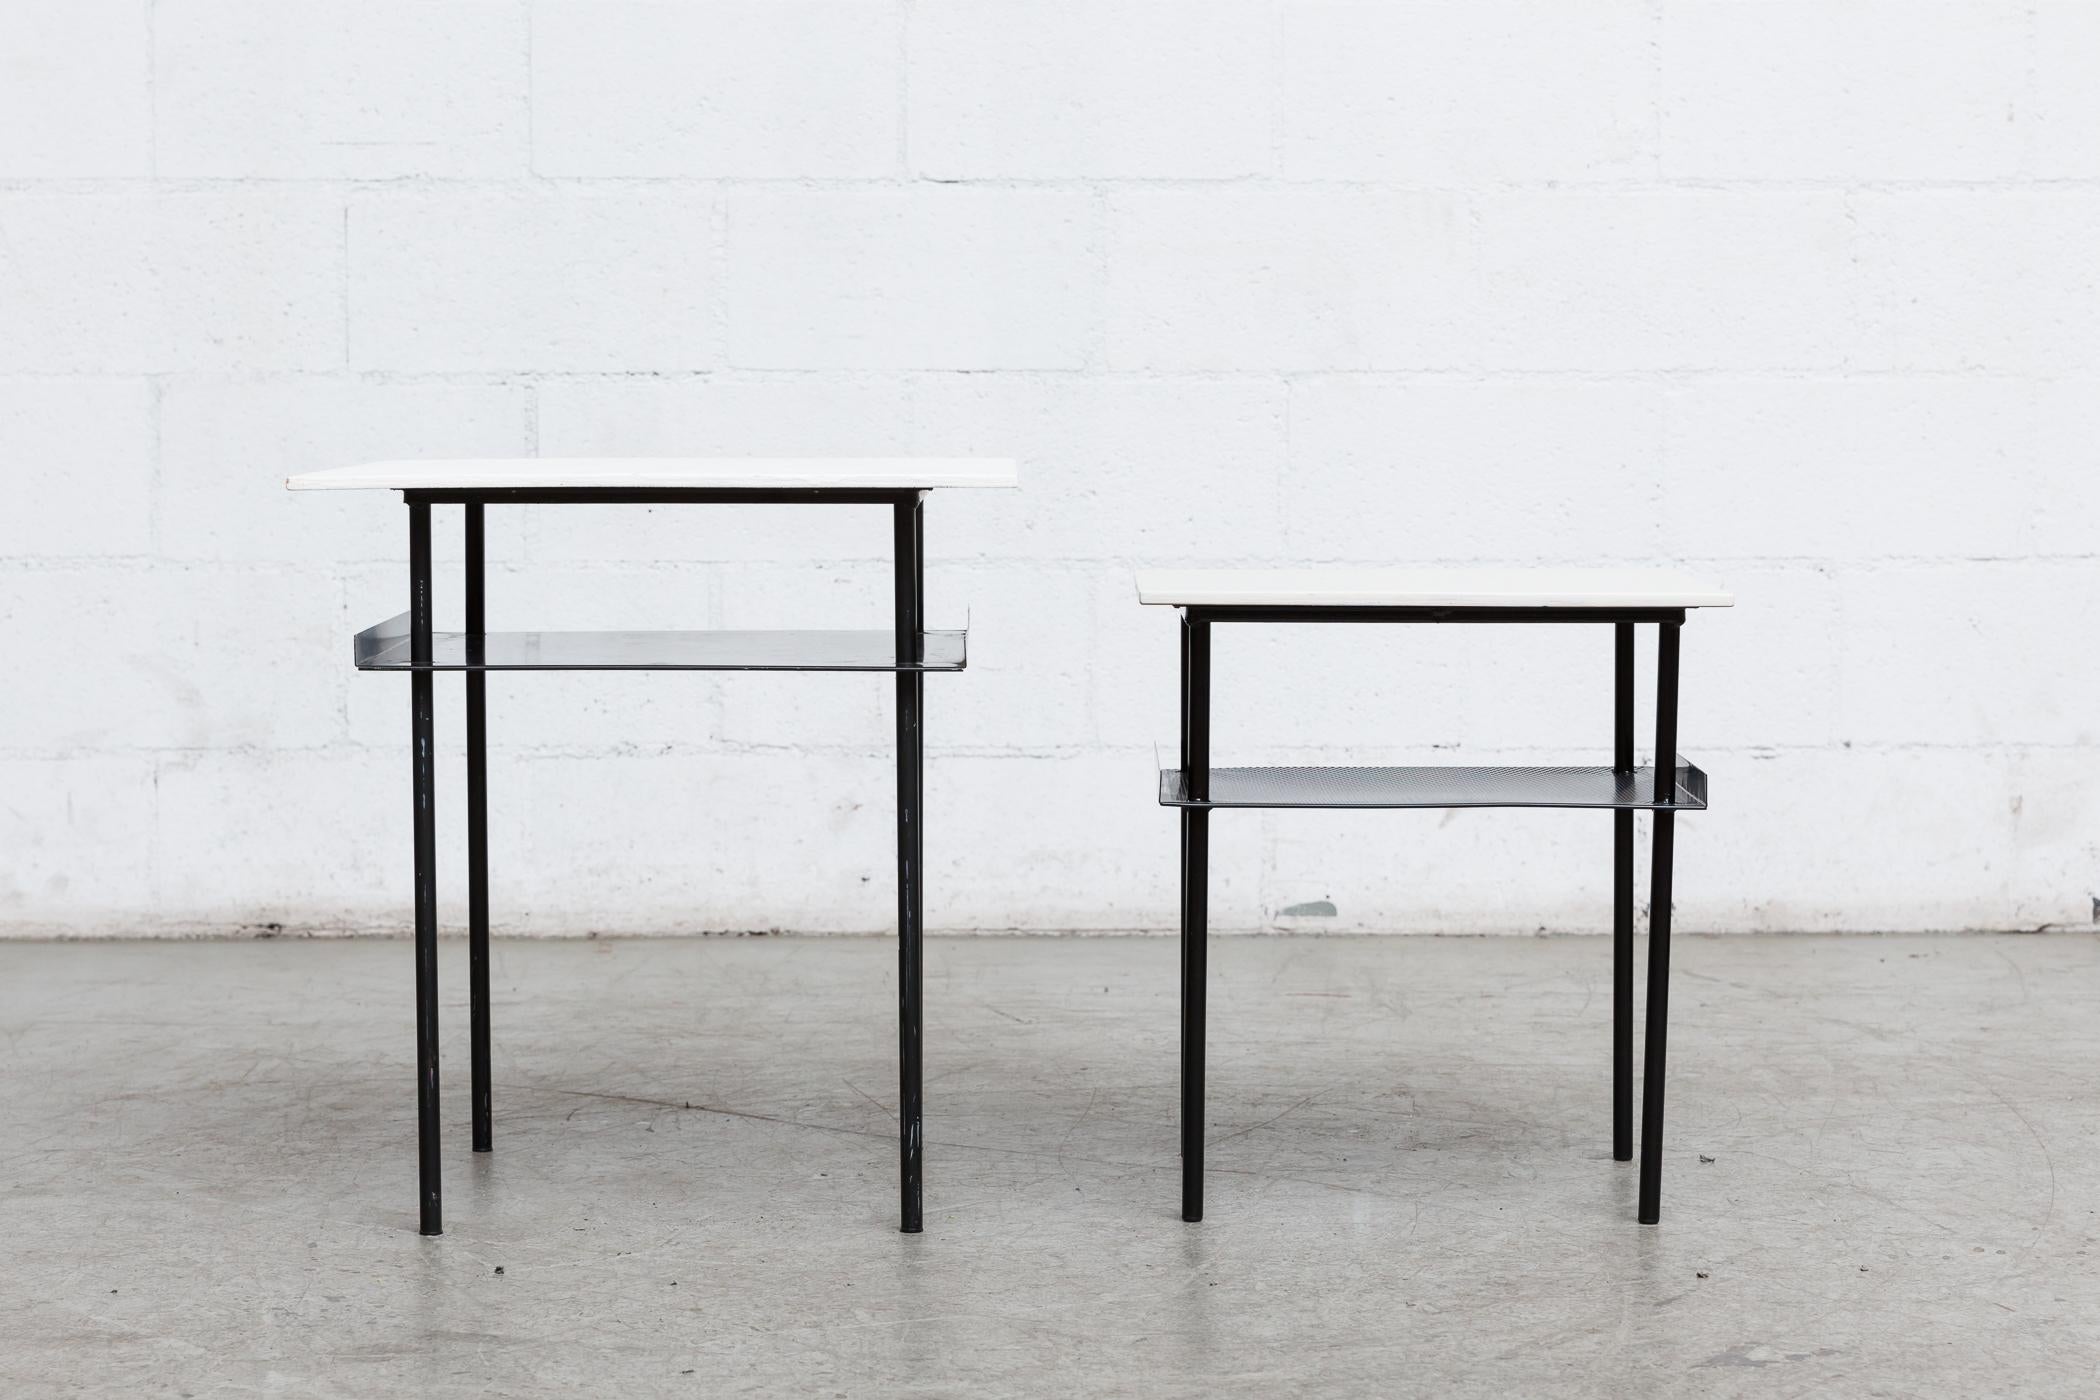 Rare Wim Rietveld side table with painted White plywood top, enameled black metal legs and sheet metal lower shelf with bent up edges. Original condition. Shown with its smaller version, listed separately.